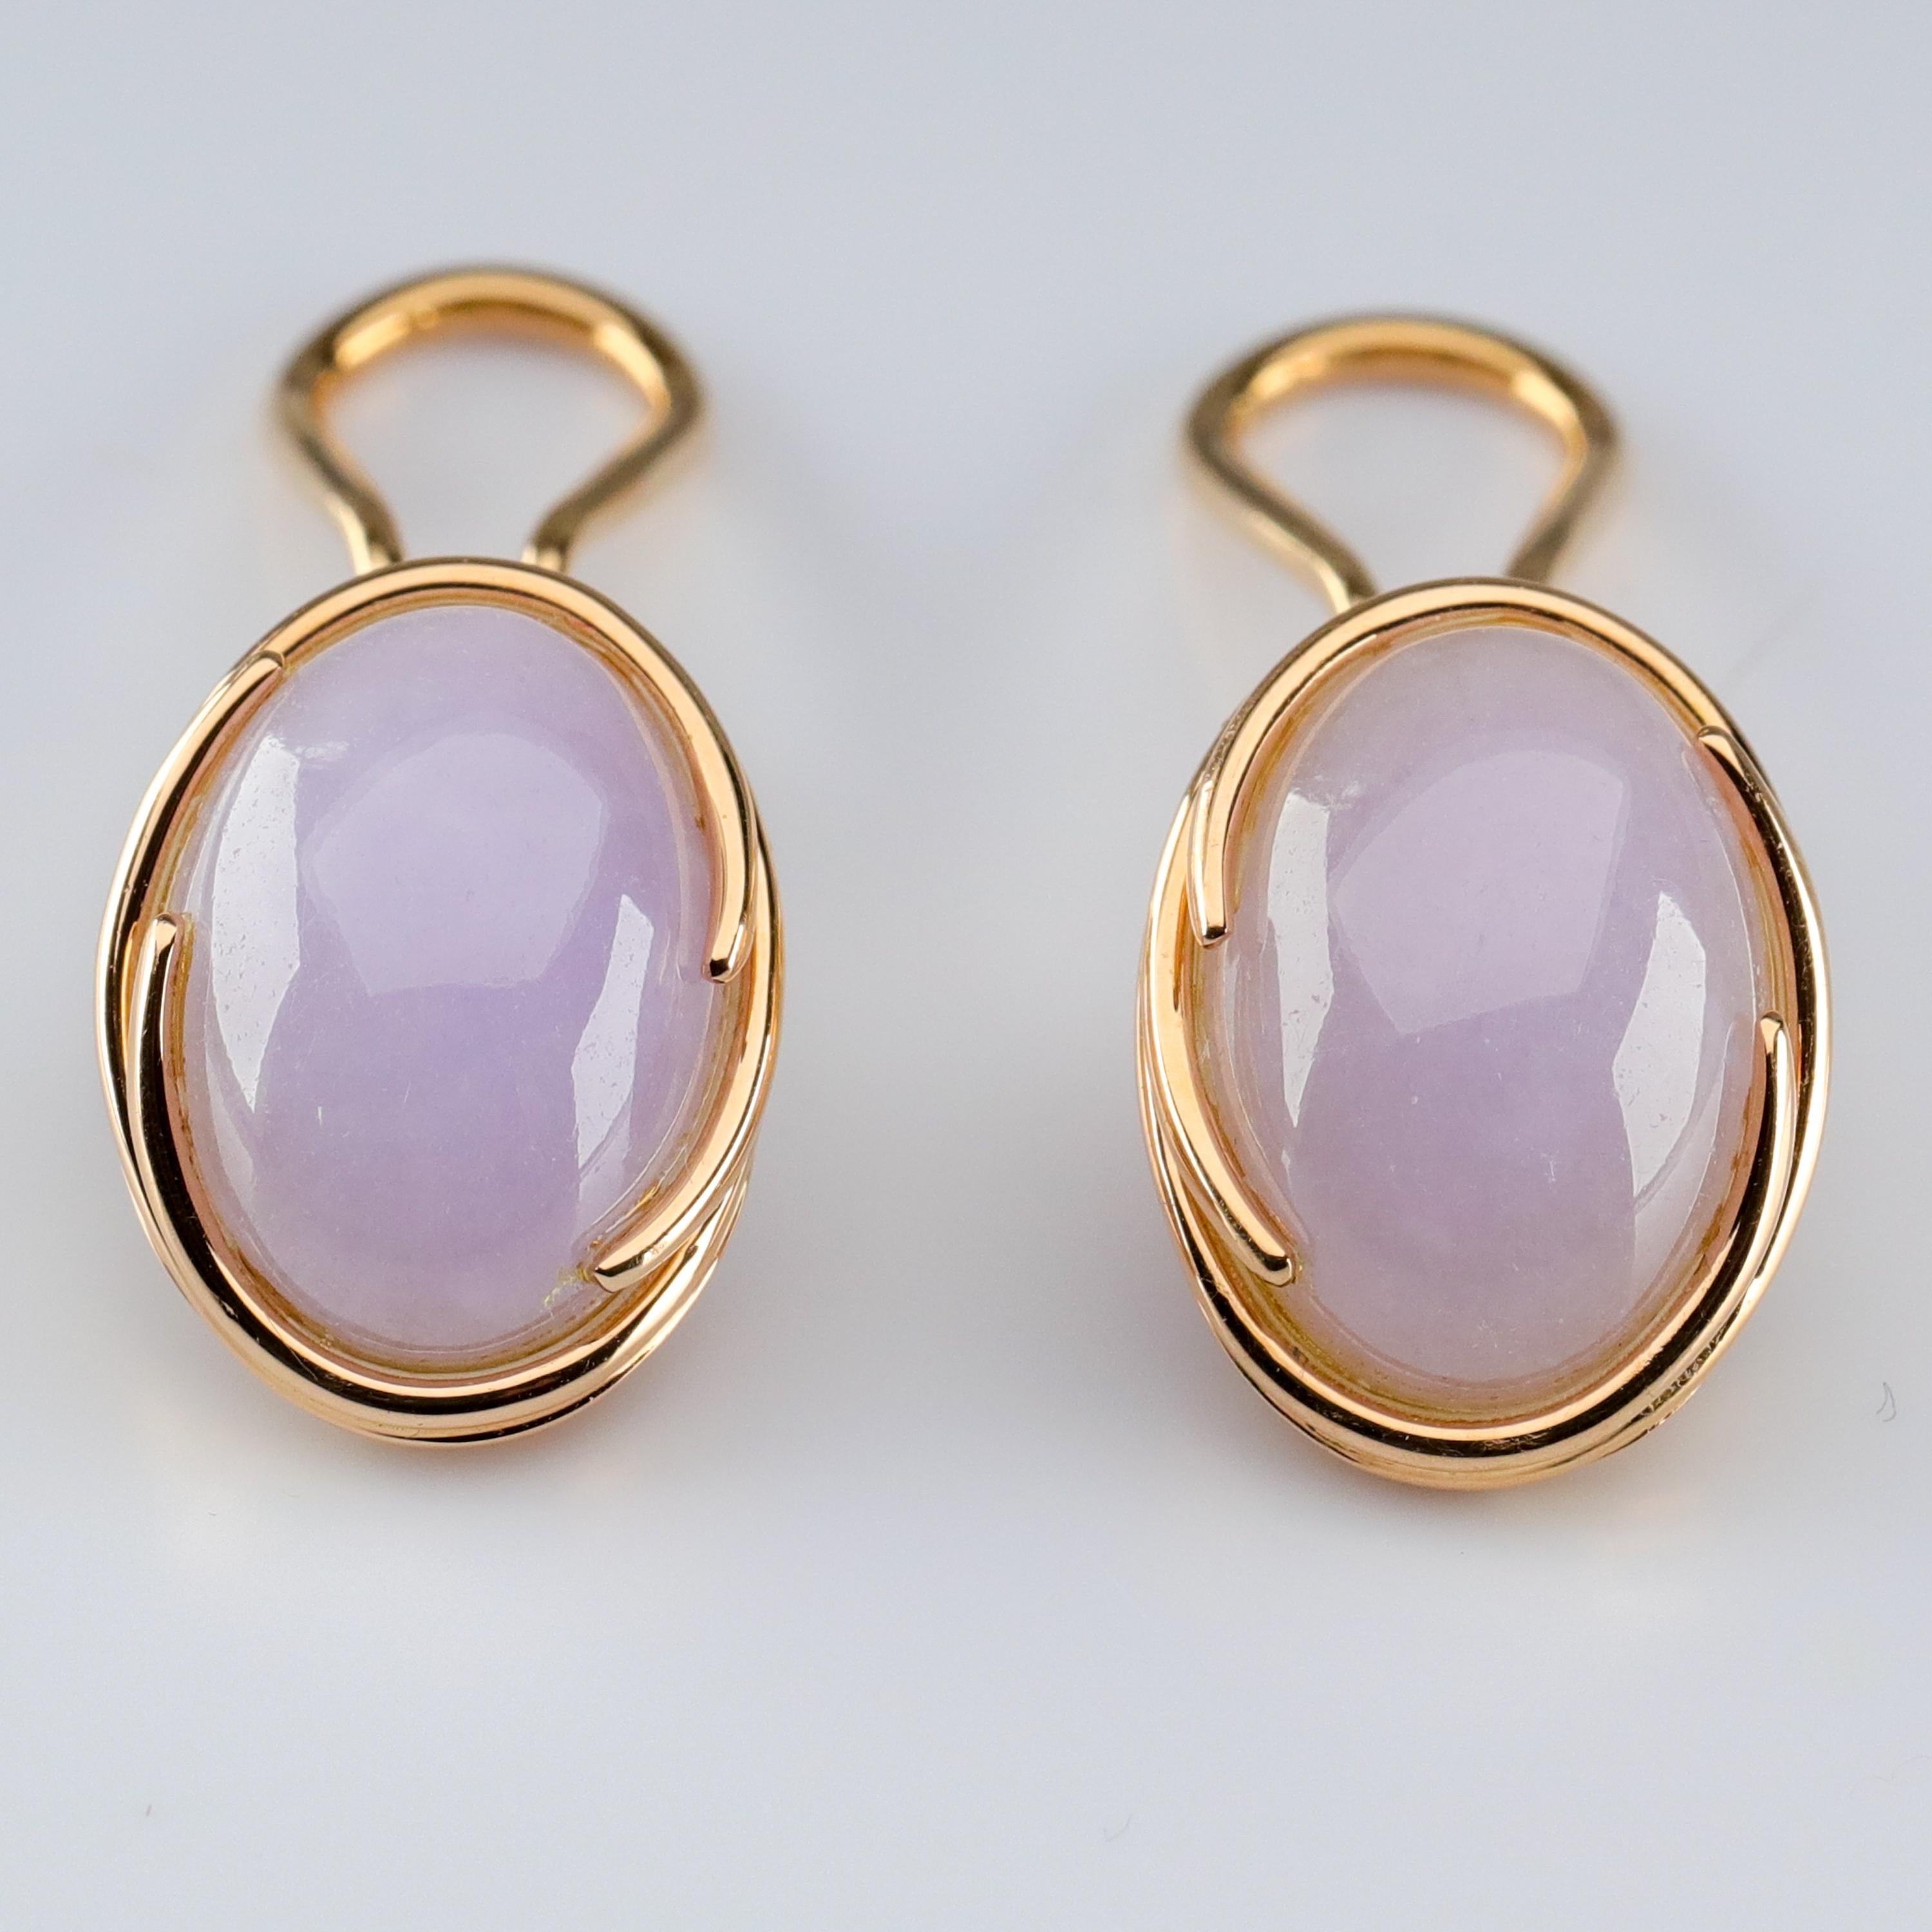 A pair of highly translucent double cabochons of luminous lavender jade are wrapped two swirls of gleaming 14K yellow gold in this late Mid-Century (circa 1970s) jadeite jade clip-on earrings from the legendary retailer, Gump's of San Francisco. For